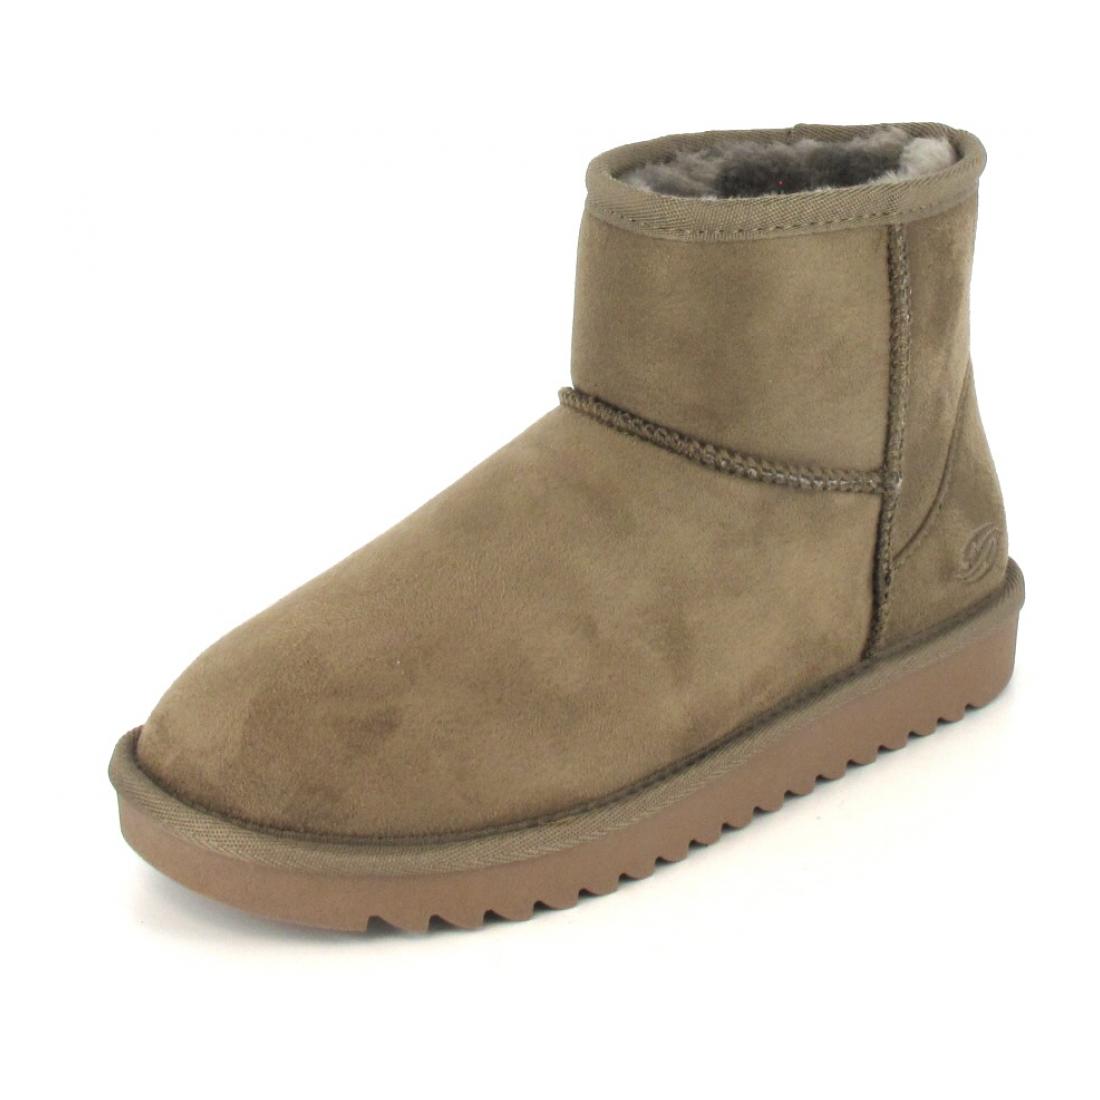 Dockers Stiefelette 430 taupe